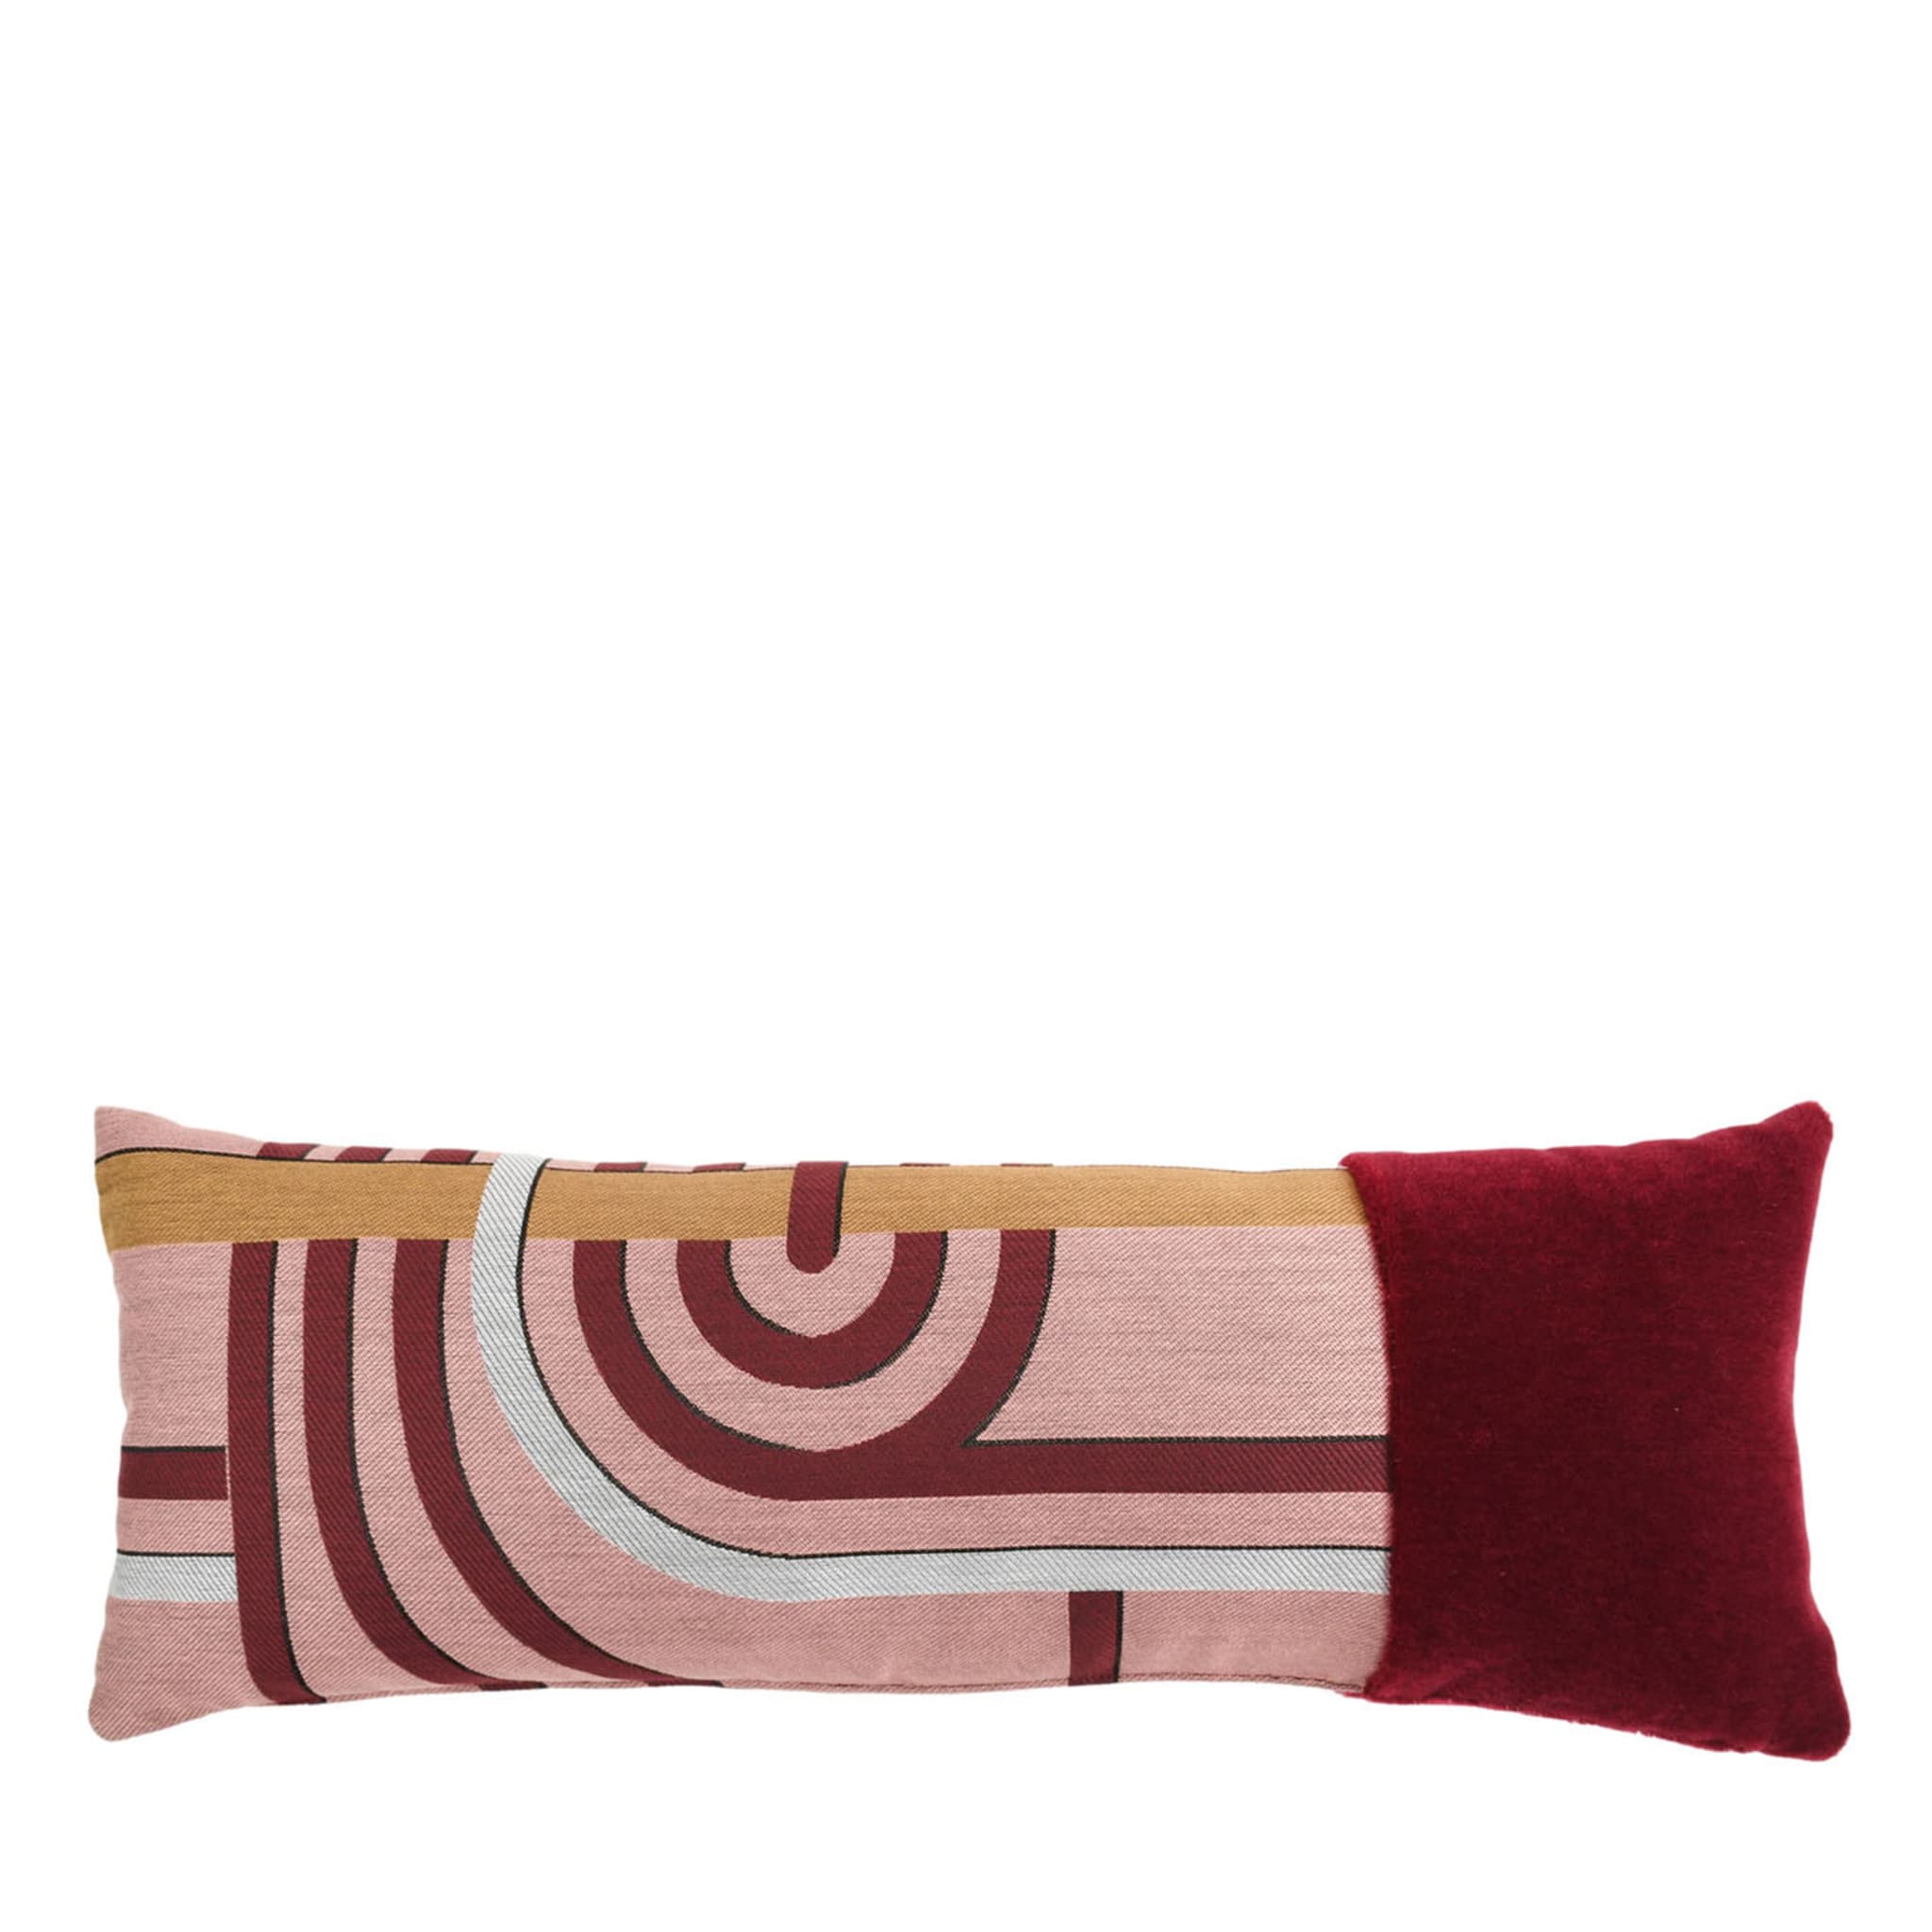 Rectangular Simple Cushion in Les Intrigues Jacquard Fabric - Main view